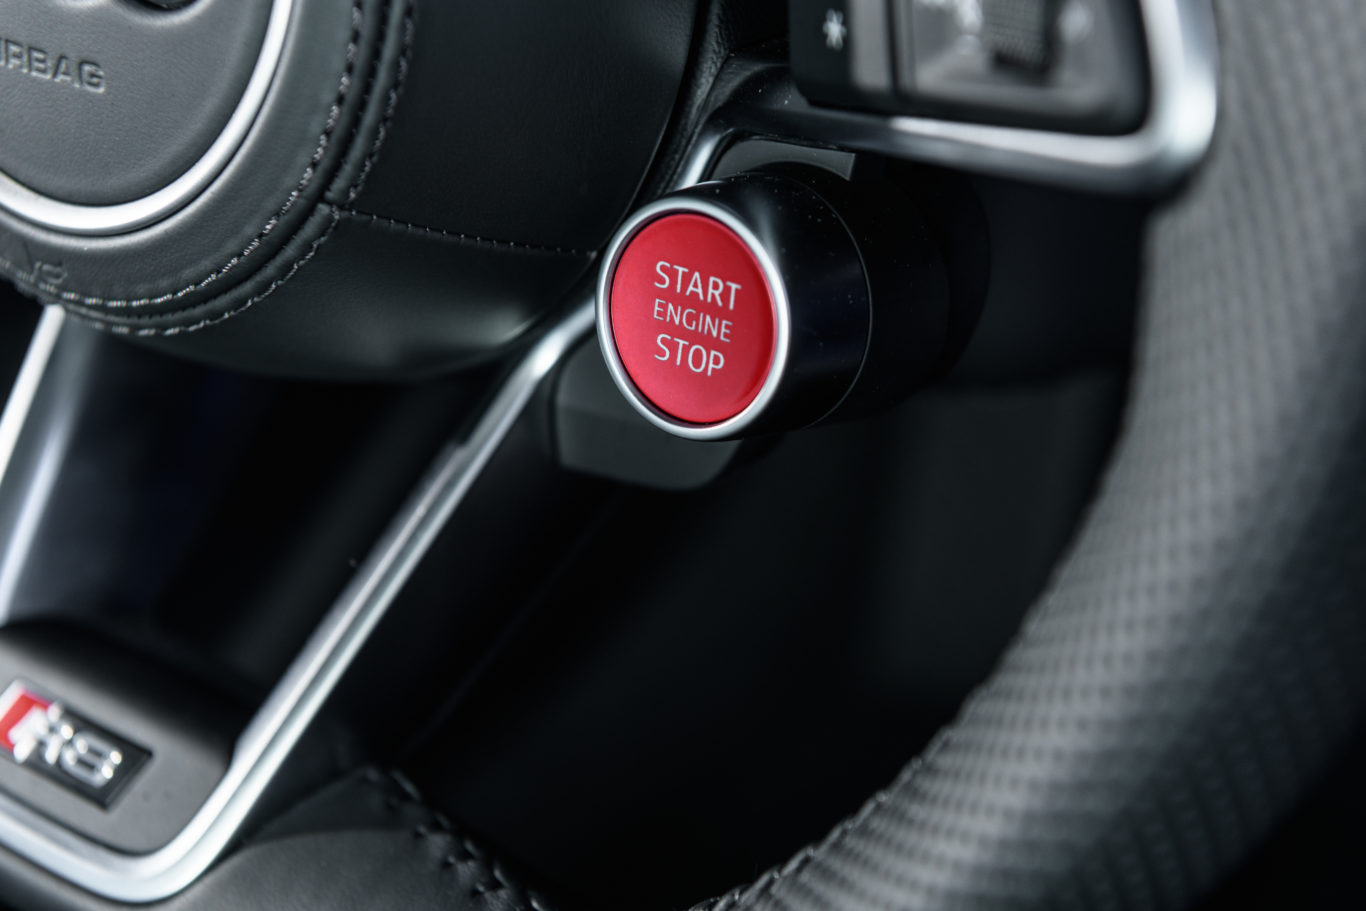 The large red starter button is a design focus in the cabin 